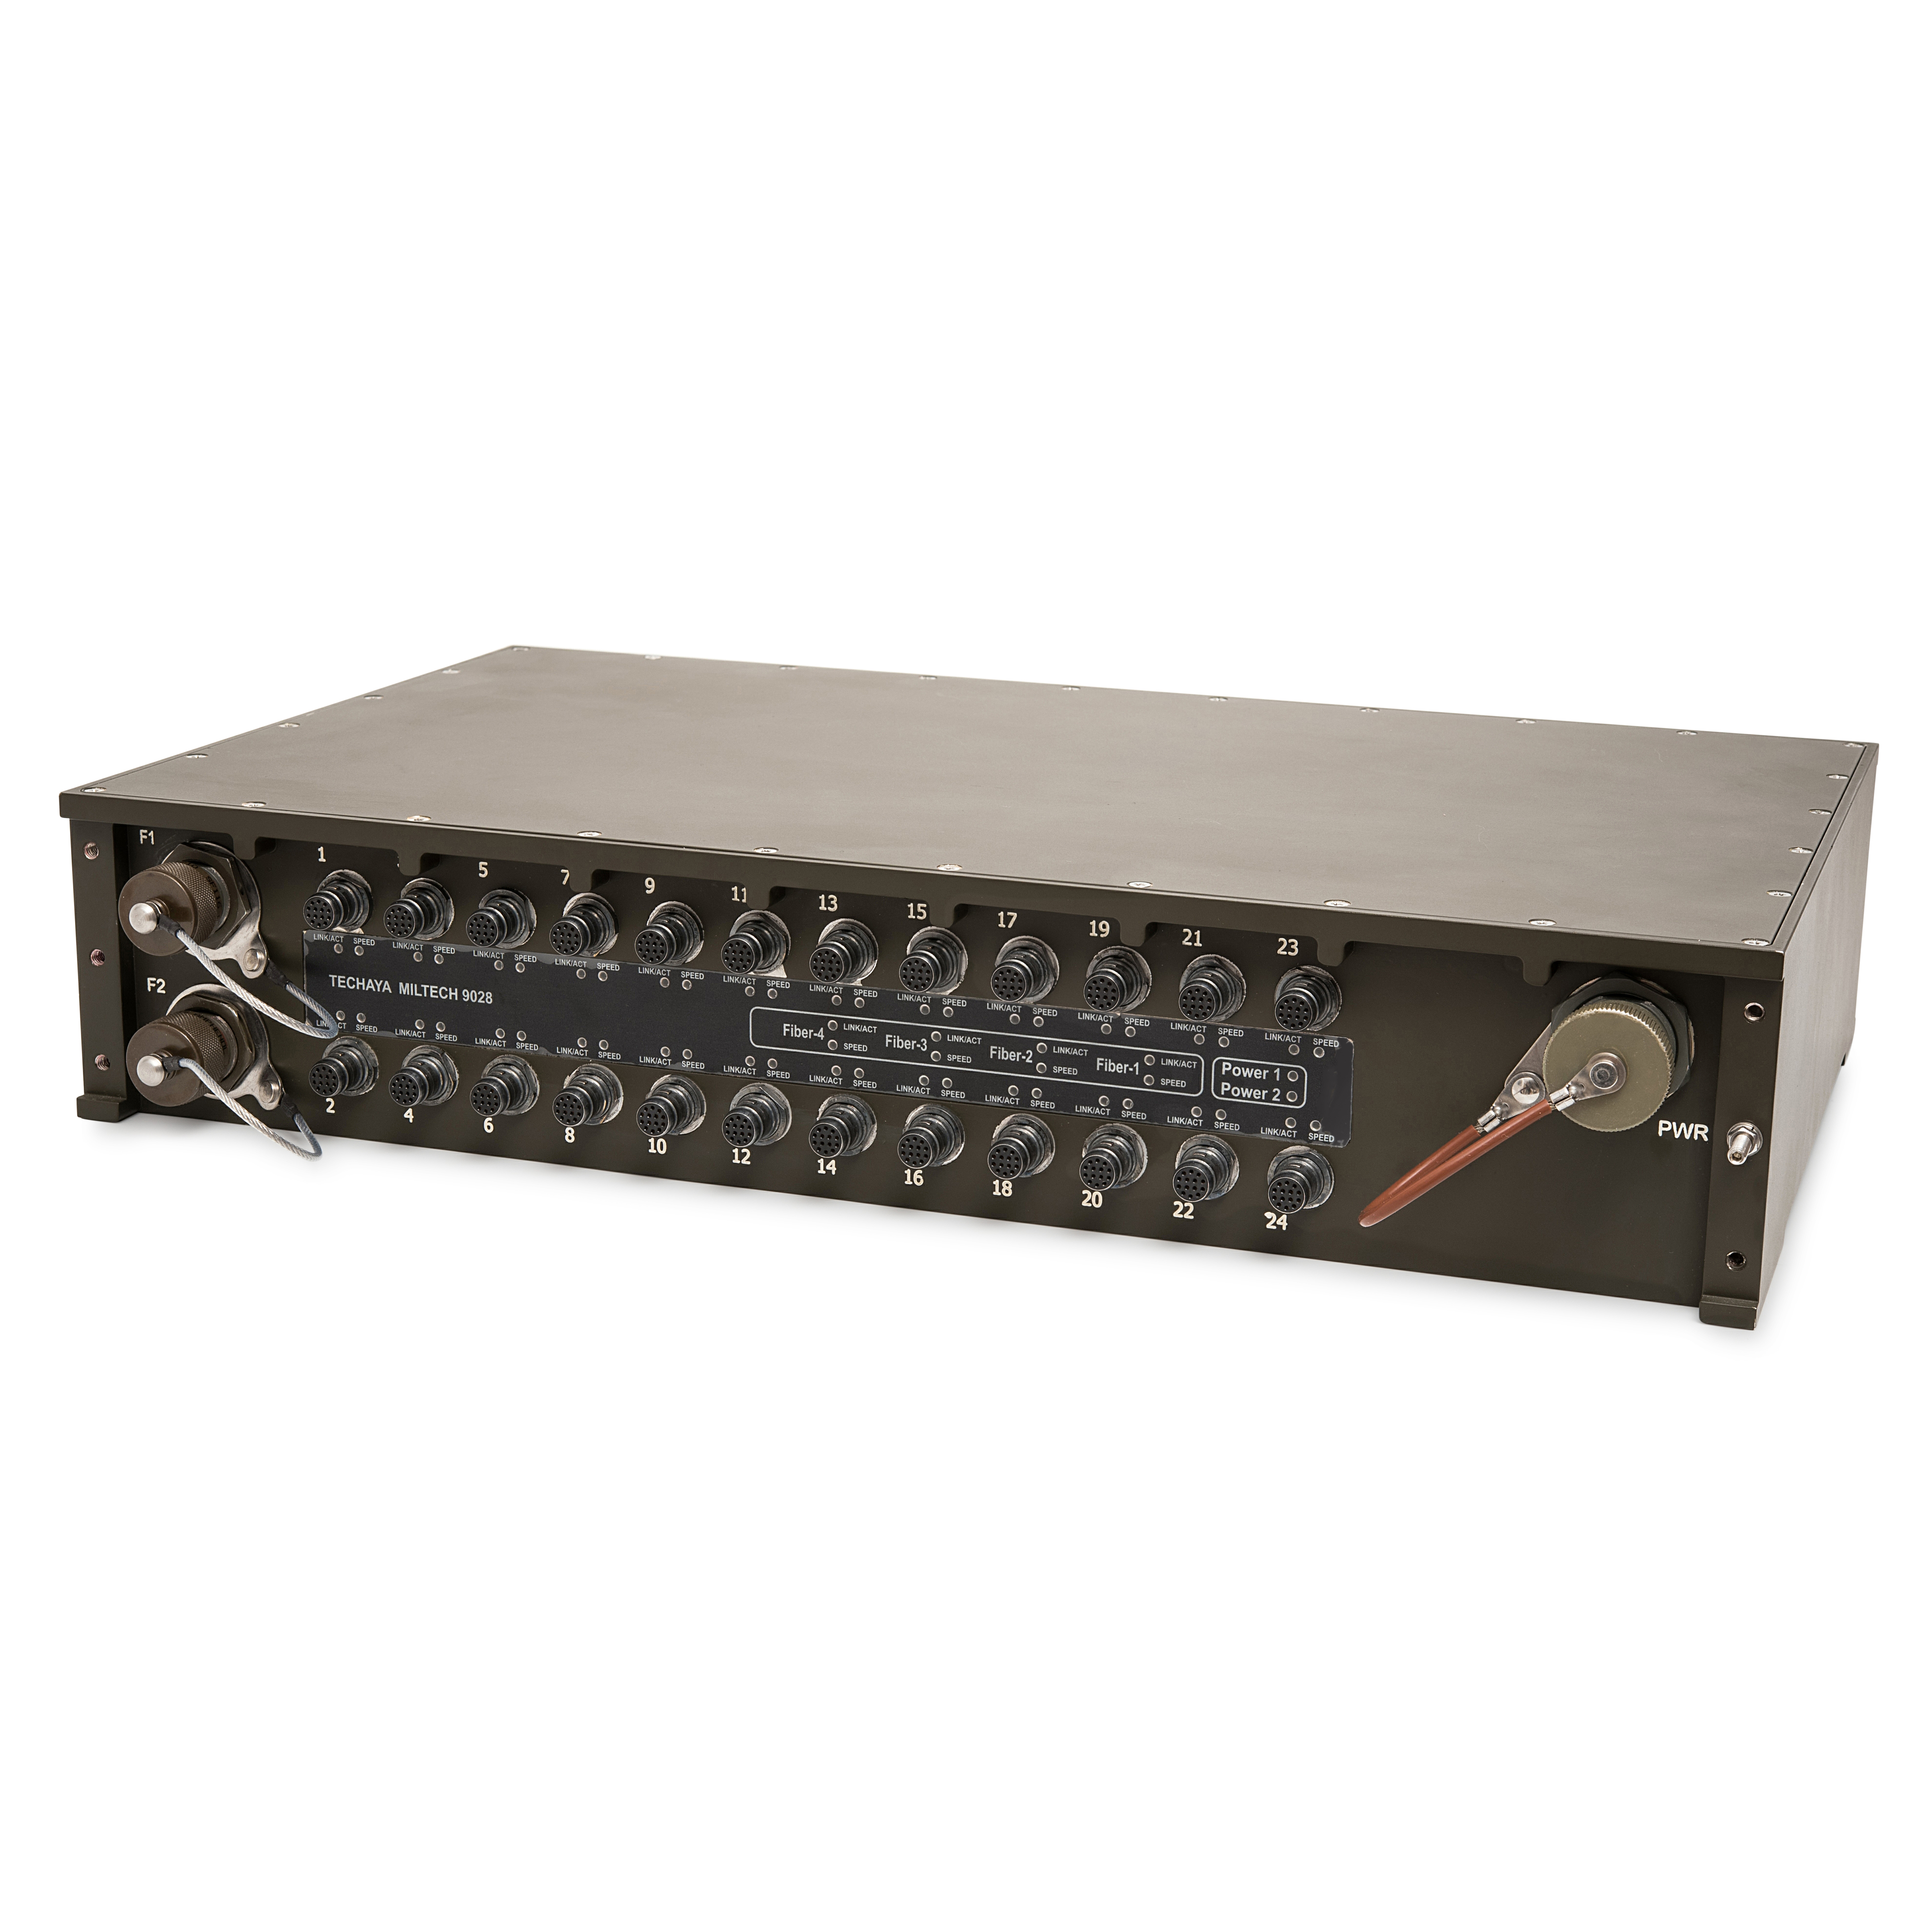 Rugged Military 10GE Router